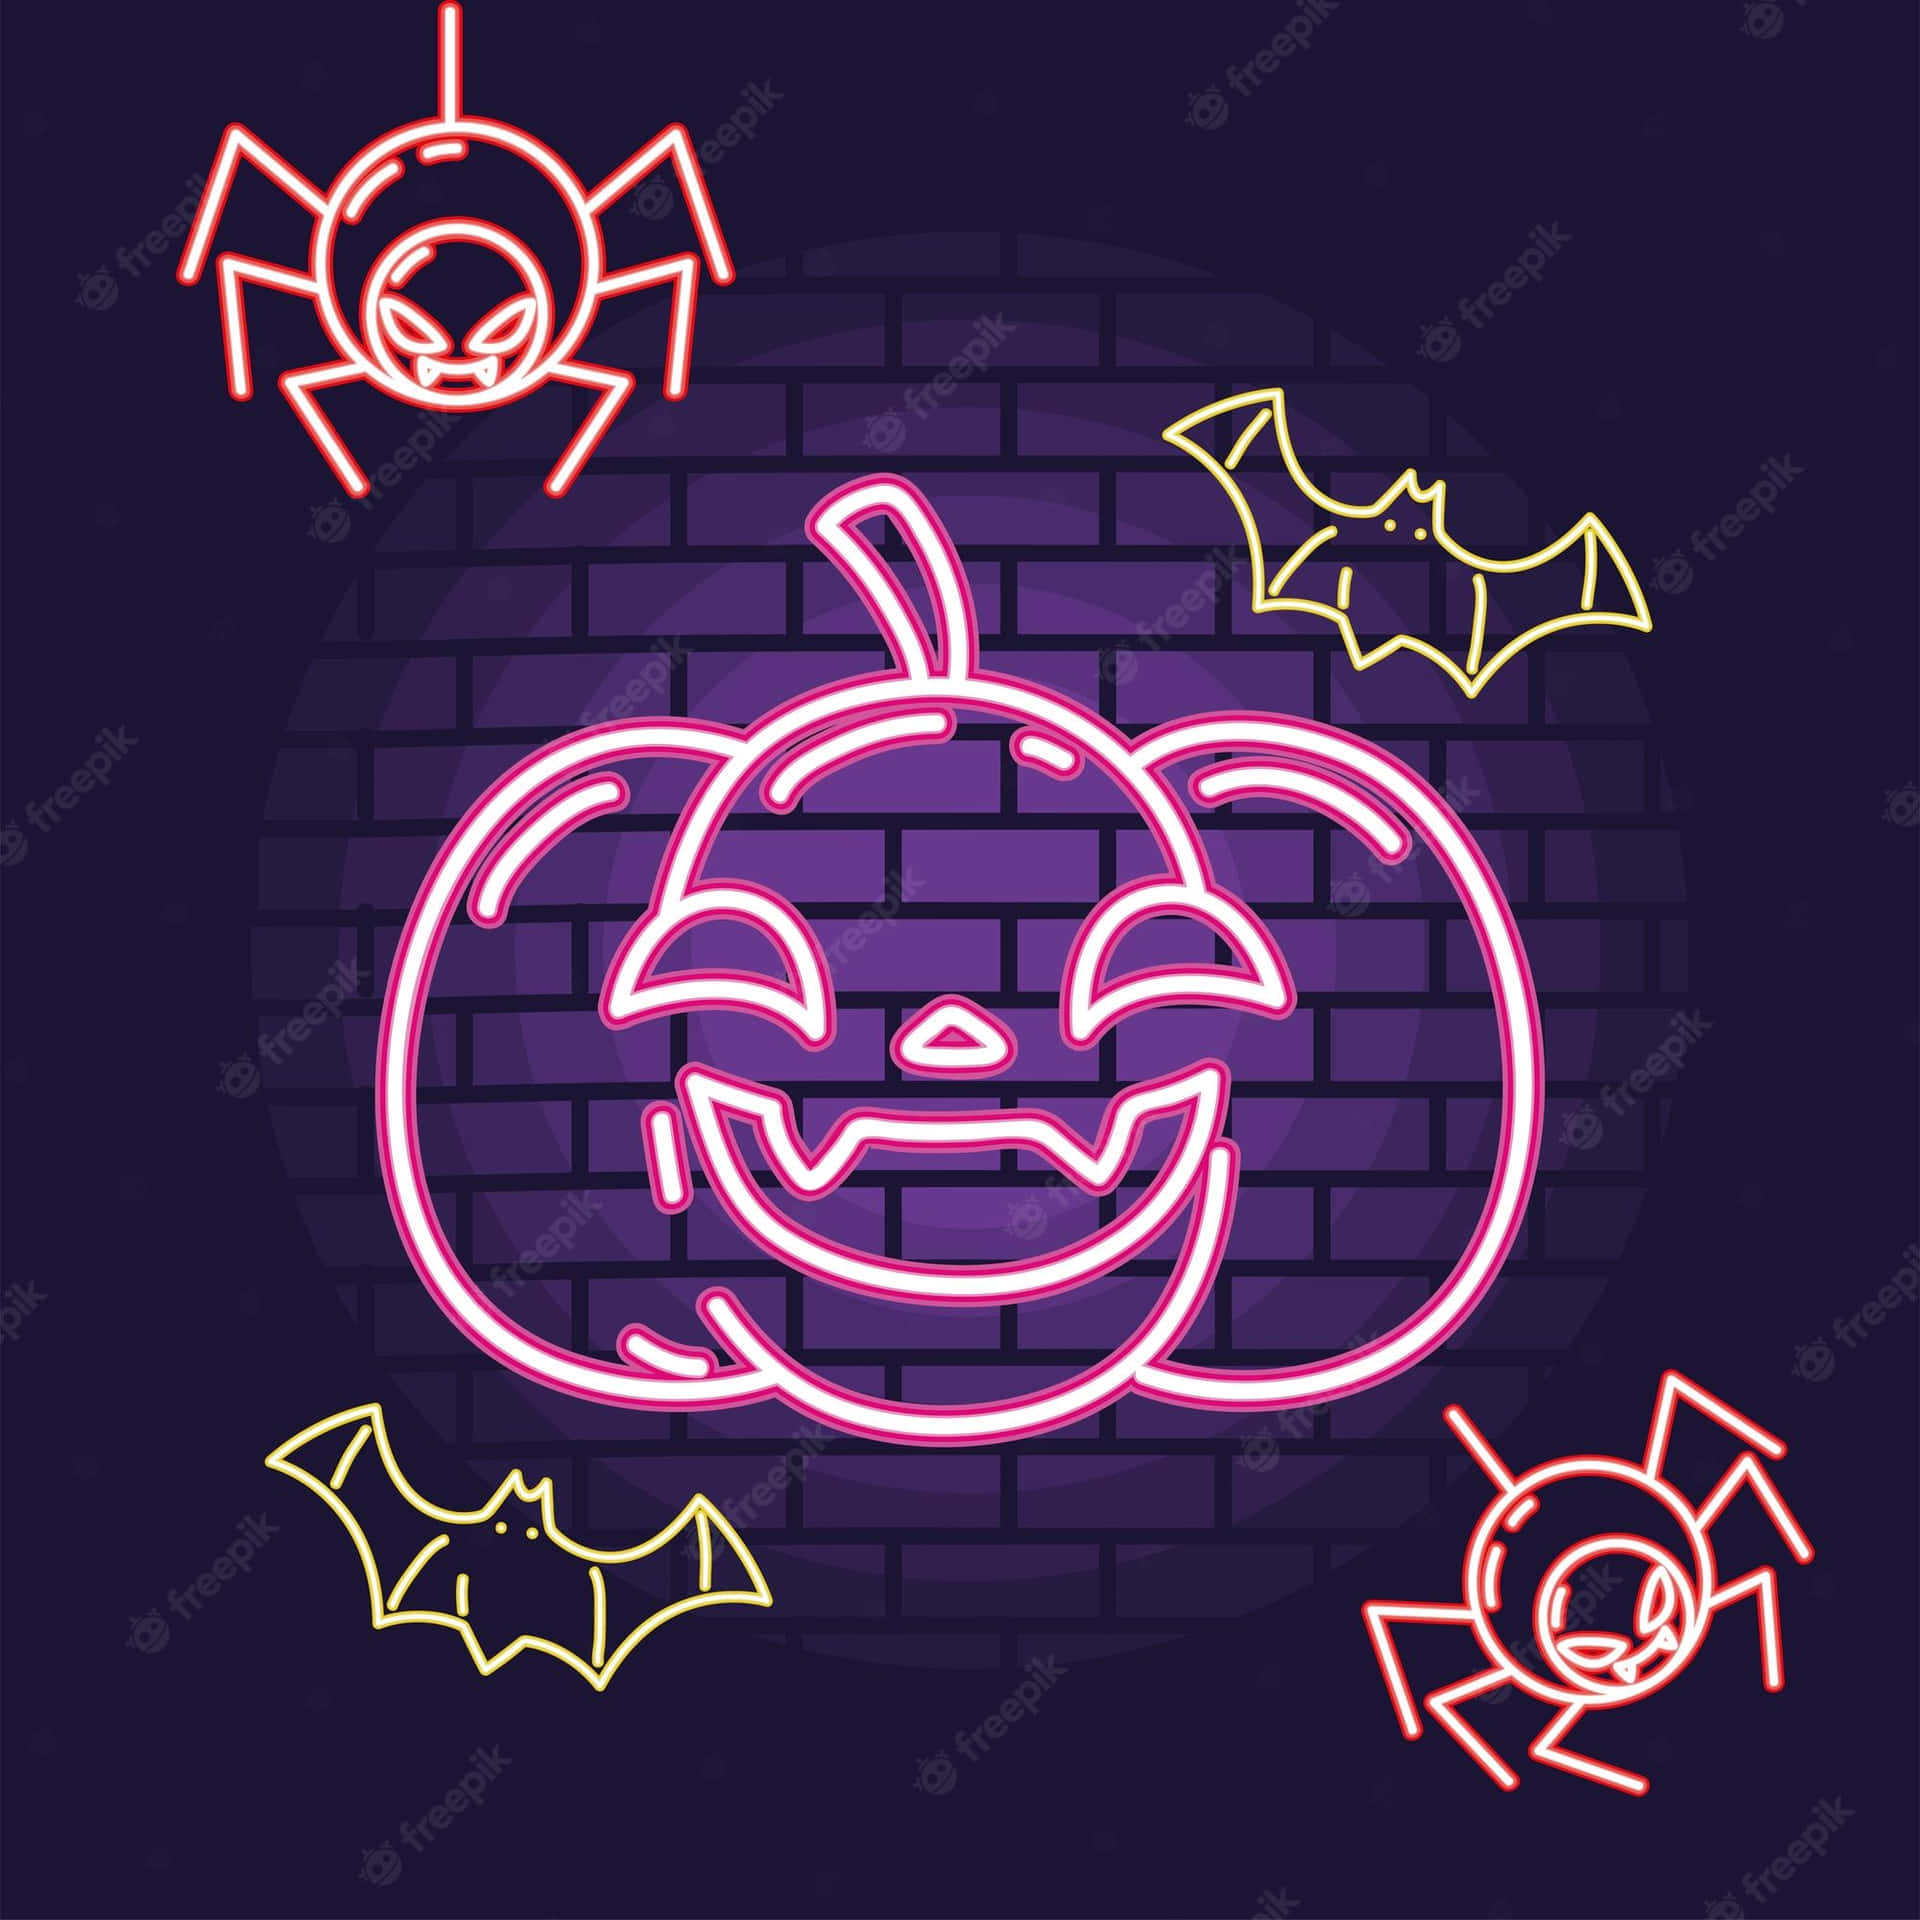 Neon Halloween - Get Ready for a Spooky Time Wallpaper